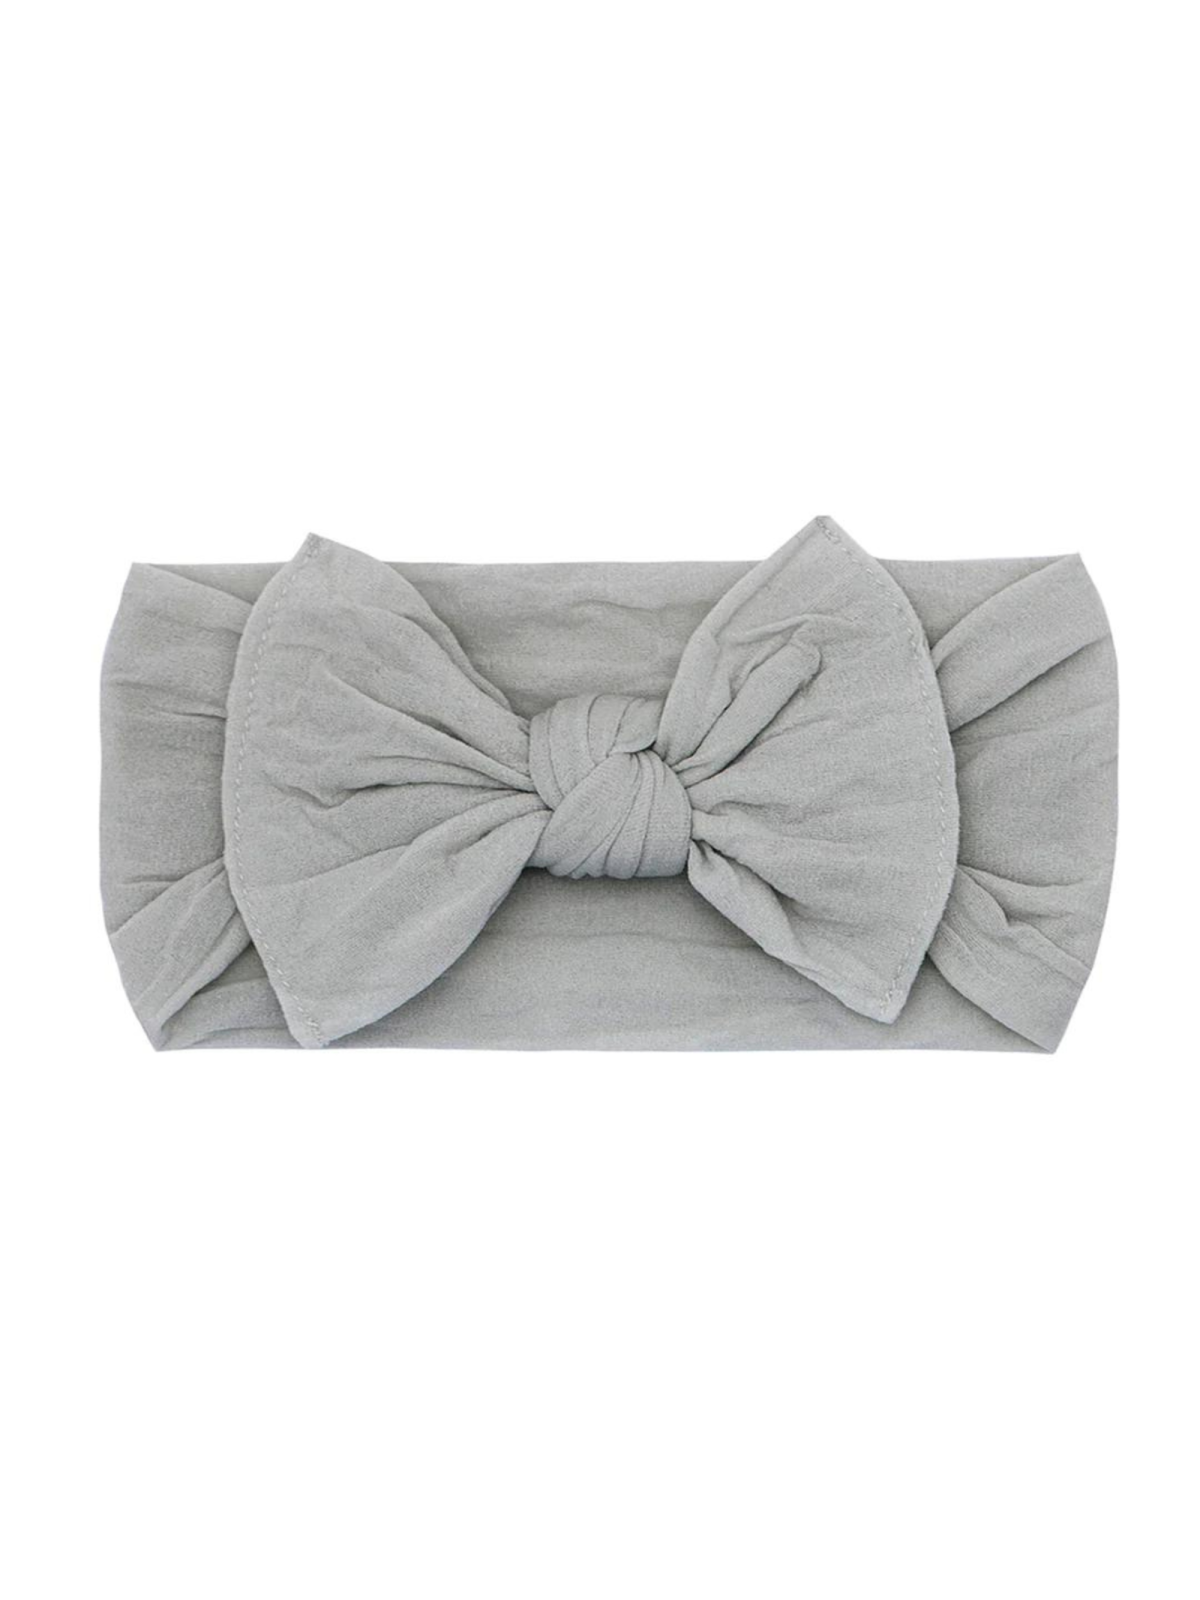 Knot Bow, Grey